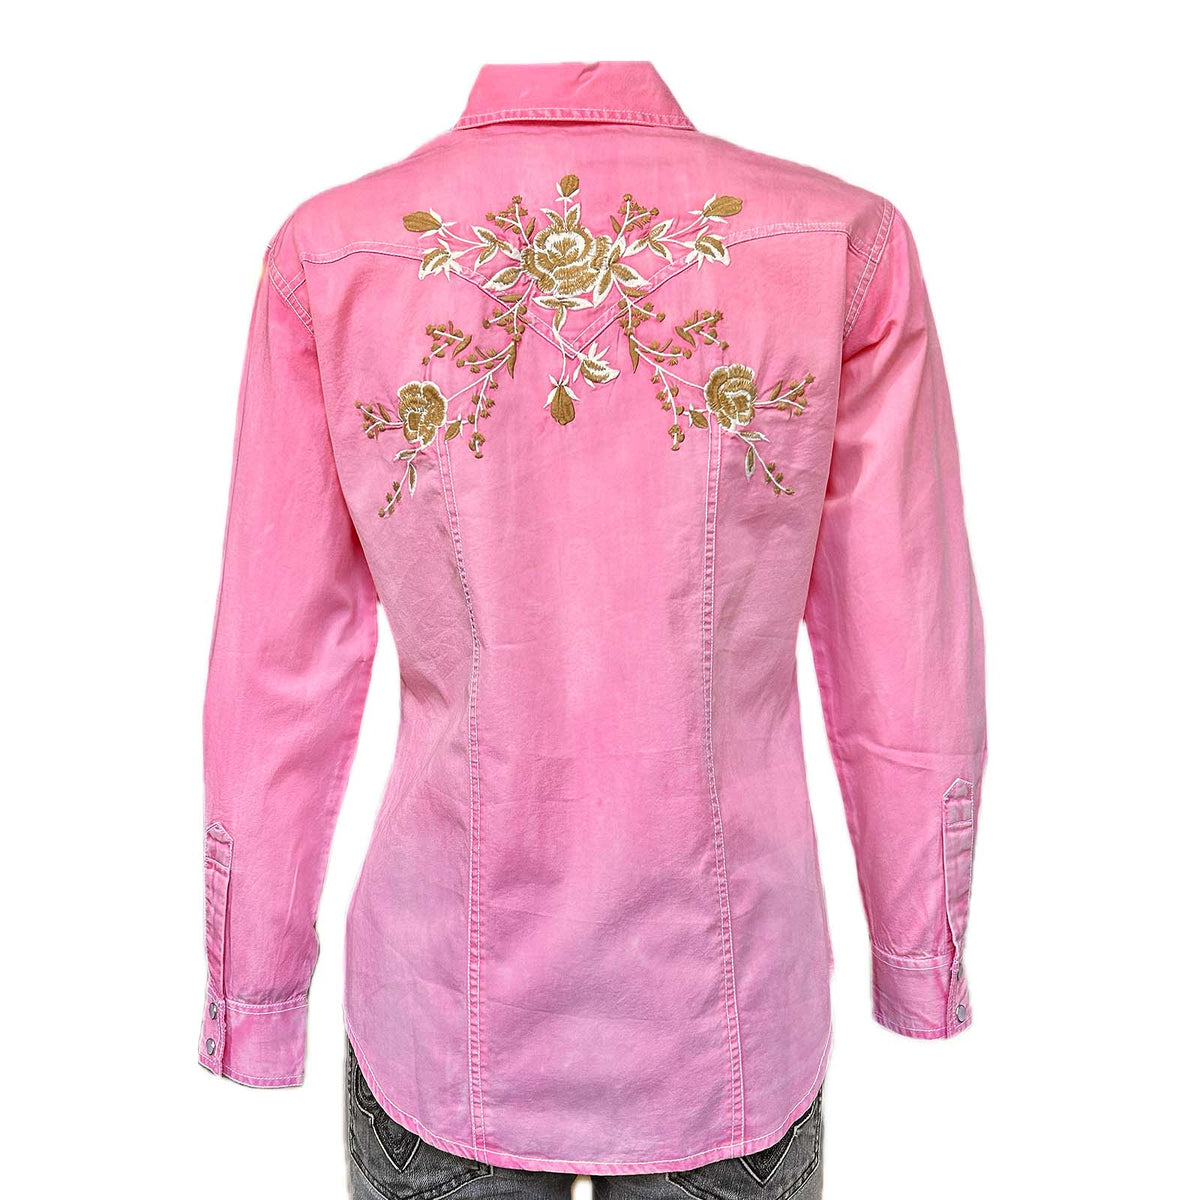 Women's Soft Pink Floral Embroidered Western Shirt